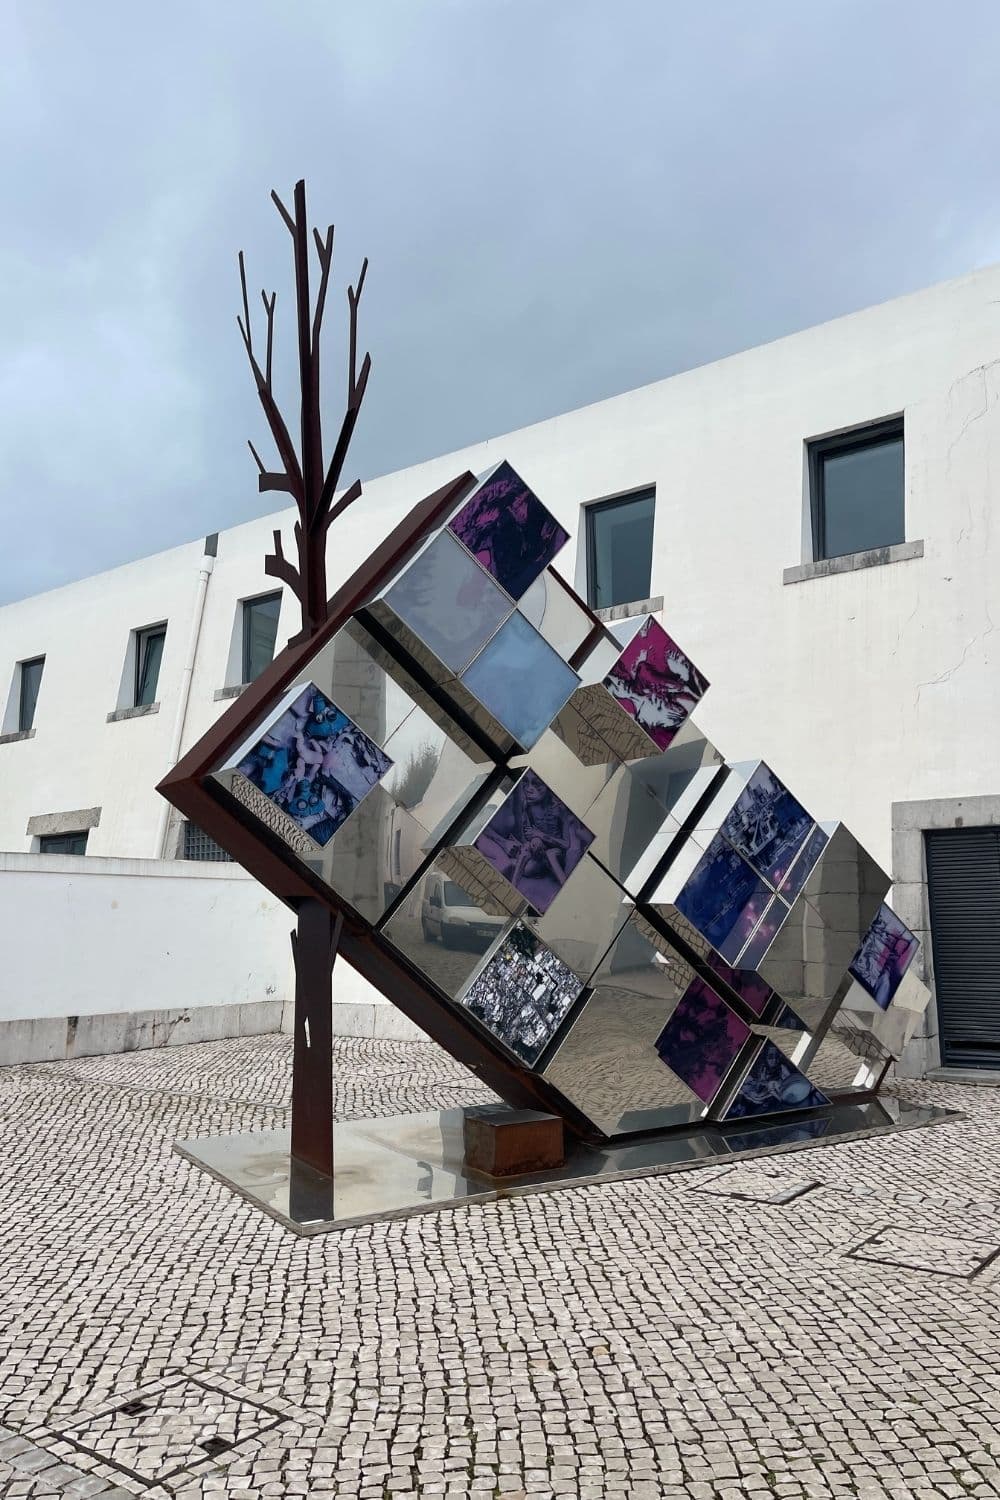 An abstract outdoor sculpture featuring a tree-like metal structure with branches, adorned with mirrored, multi-angled panels reflecting various hues of blue and purple under an overcast sky, set against a backdrop of a white modern building with square windows.